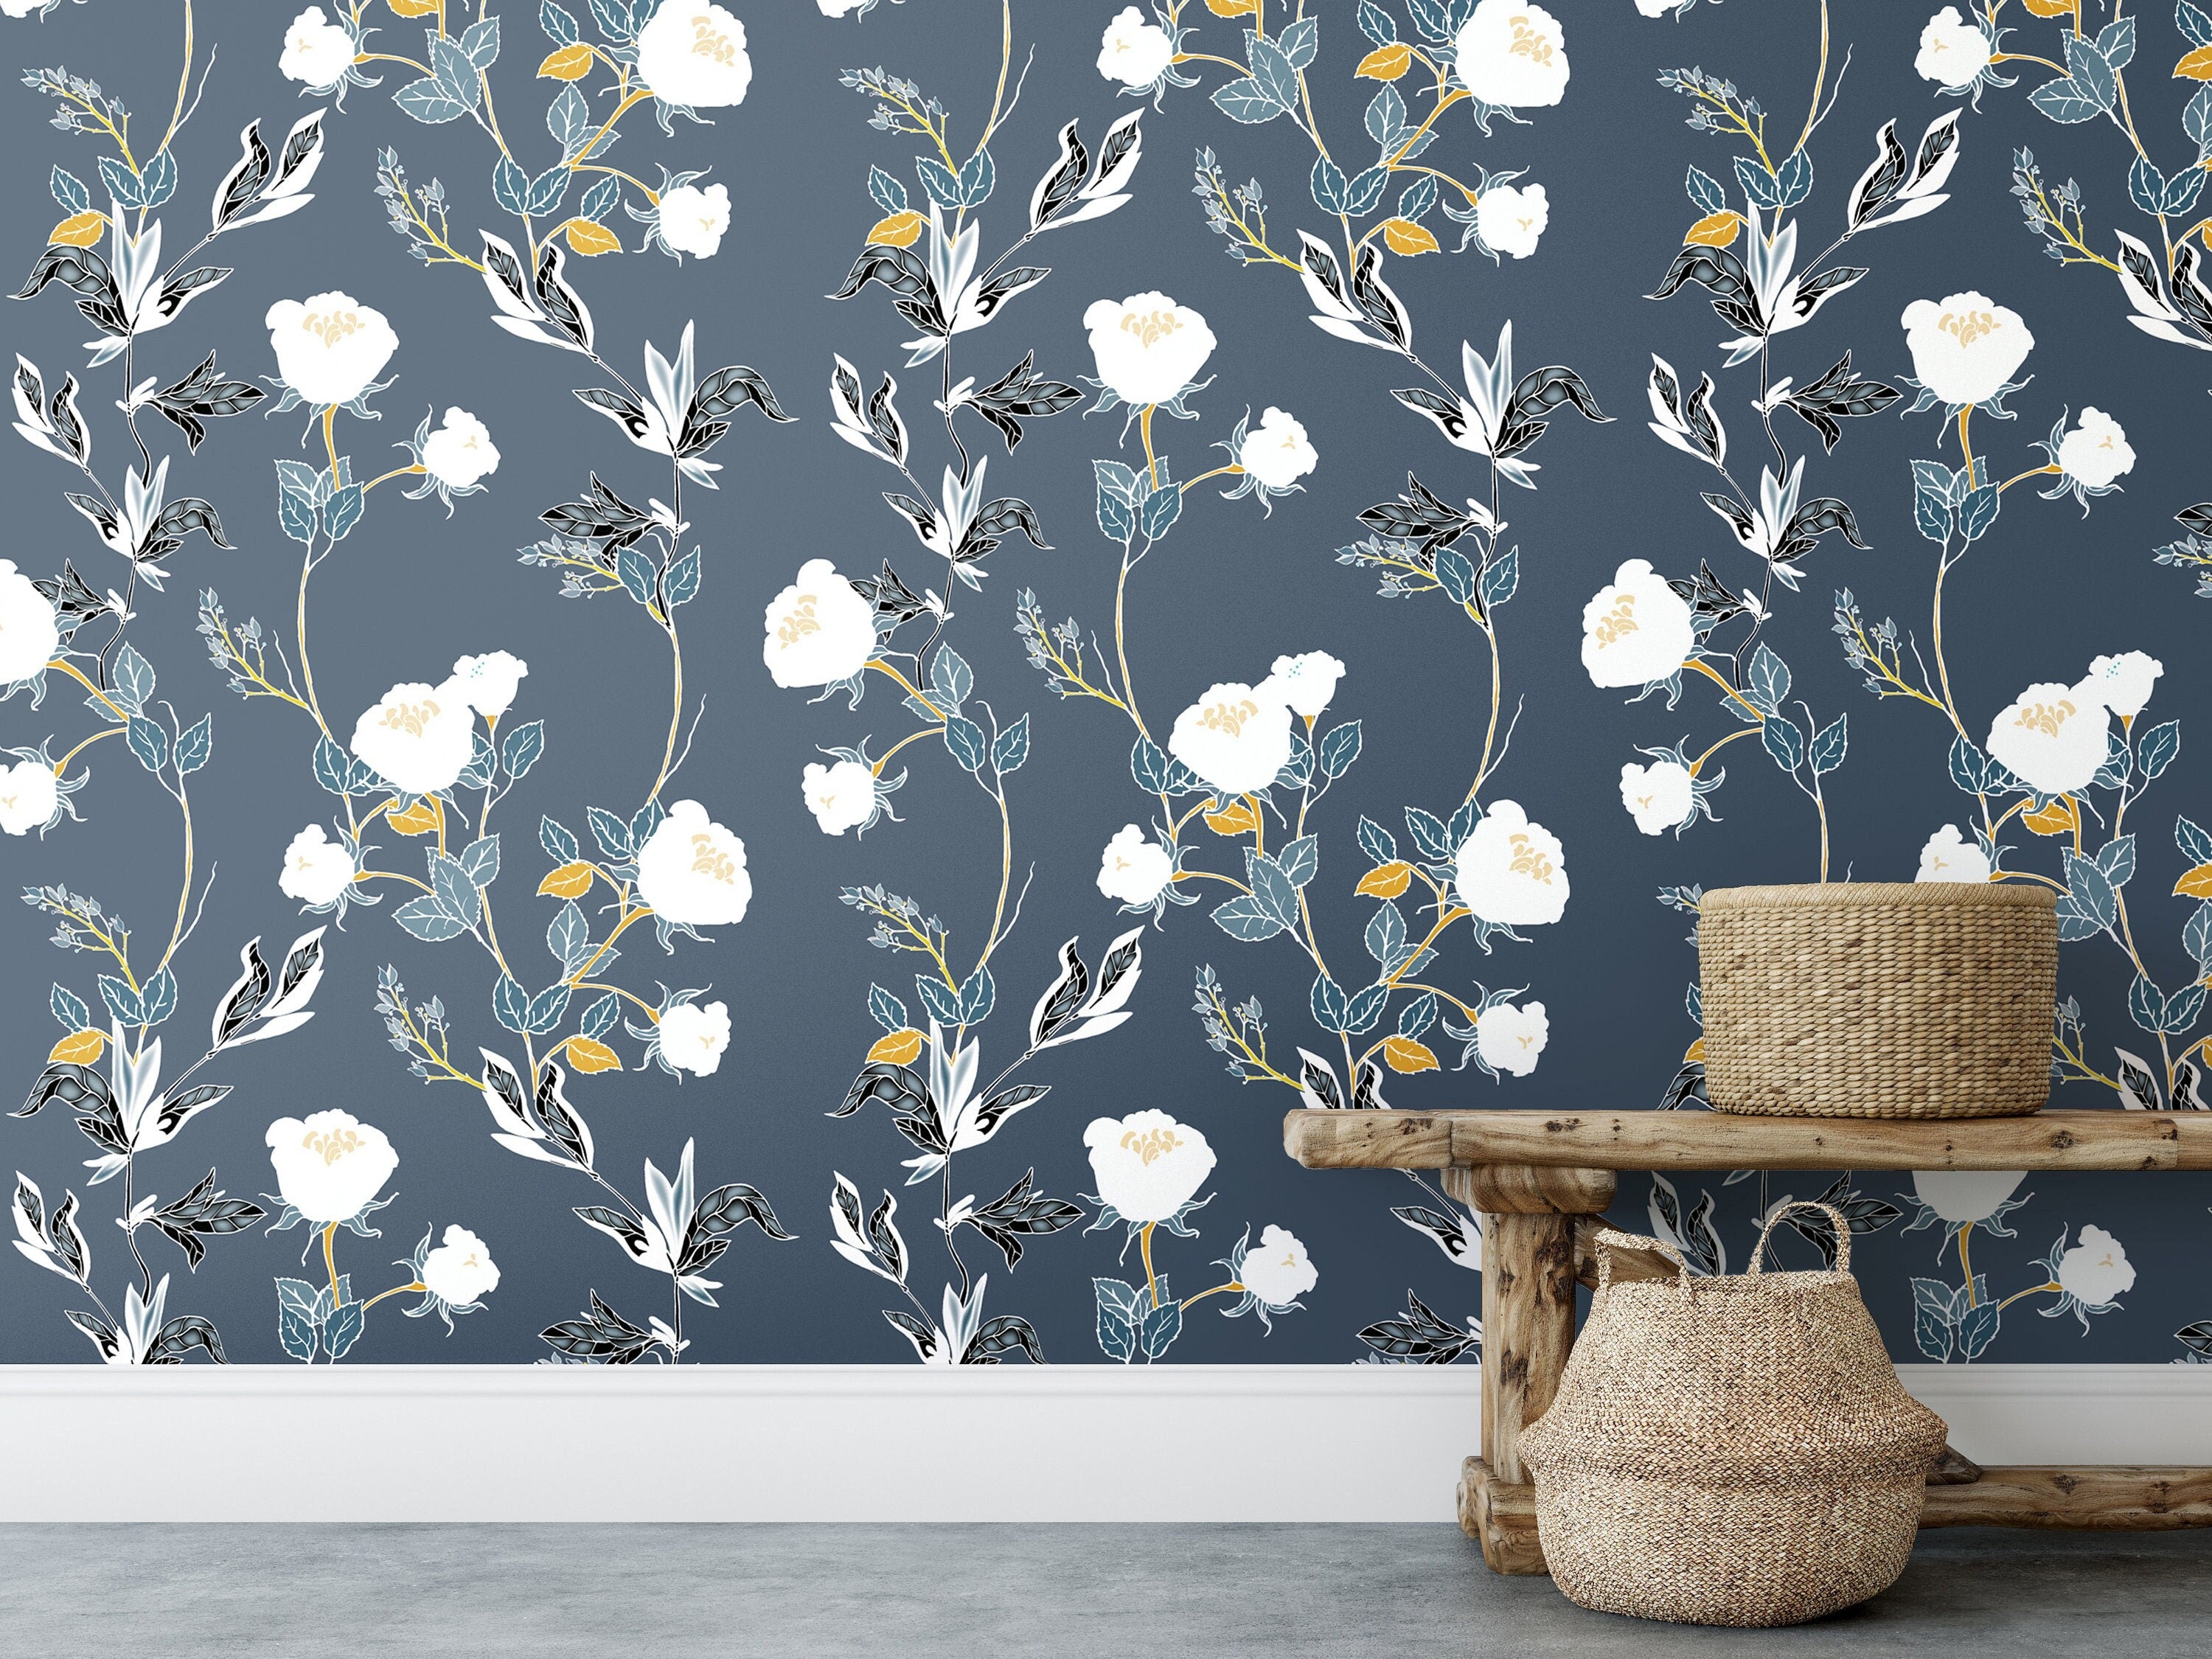 Navy White Floral Wallpaper | Wallpaper Peel and Stick | Removable Wallpaper | Peel and Stick Wallpaper | Wall Paper Peel And Stick | 2166 - JamesAndColors